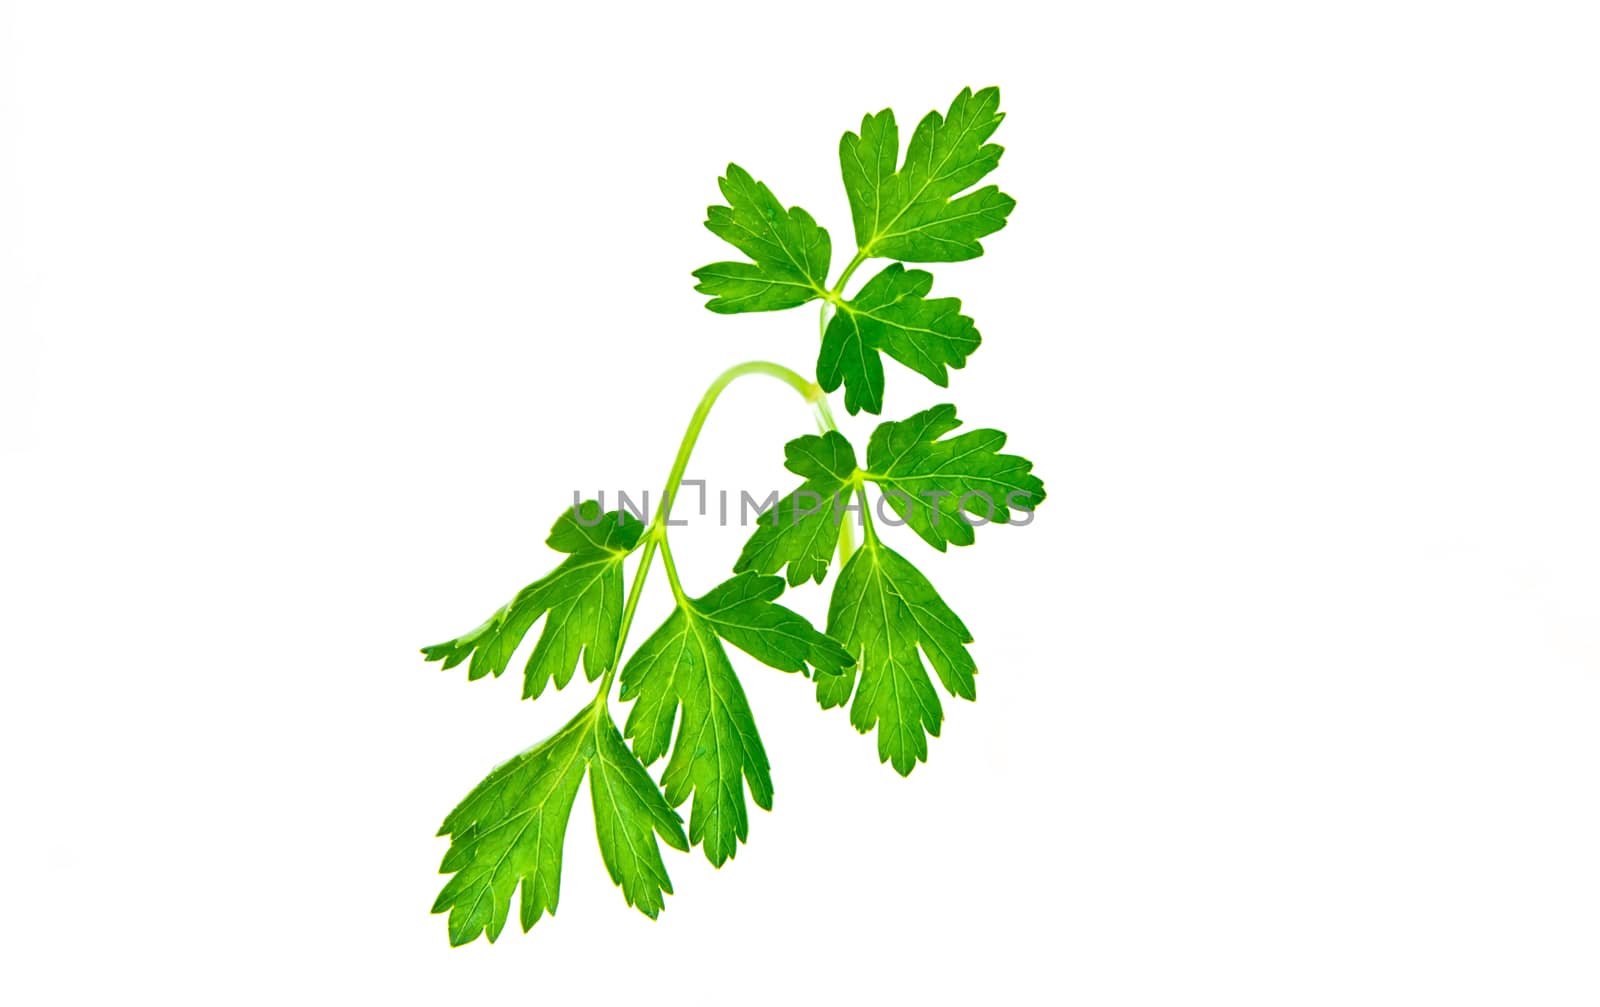 Curly Leaf Parsley sprig from the garden by huntz